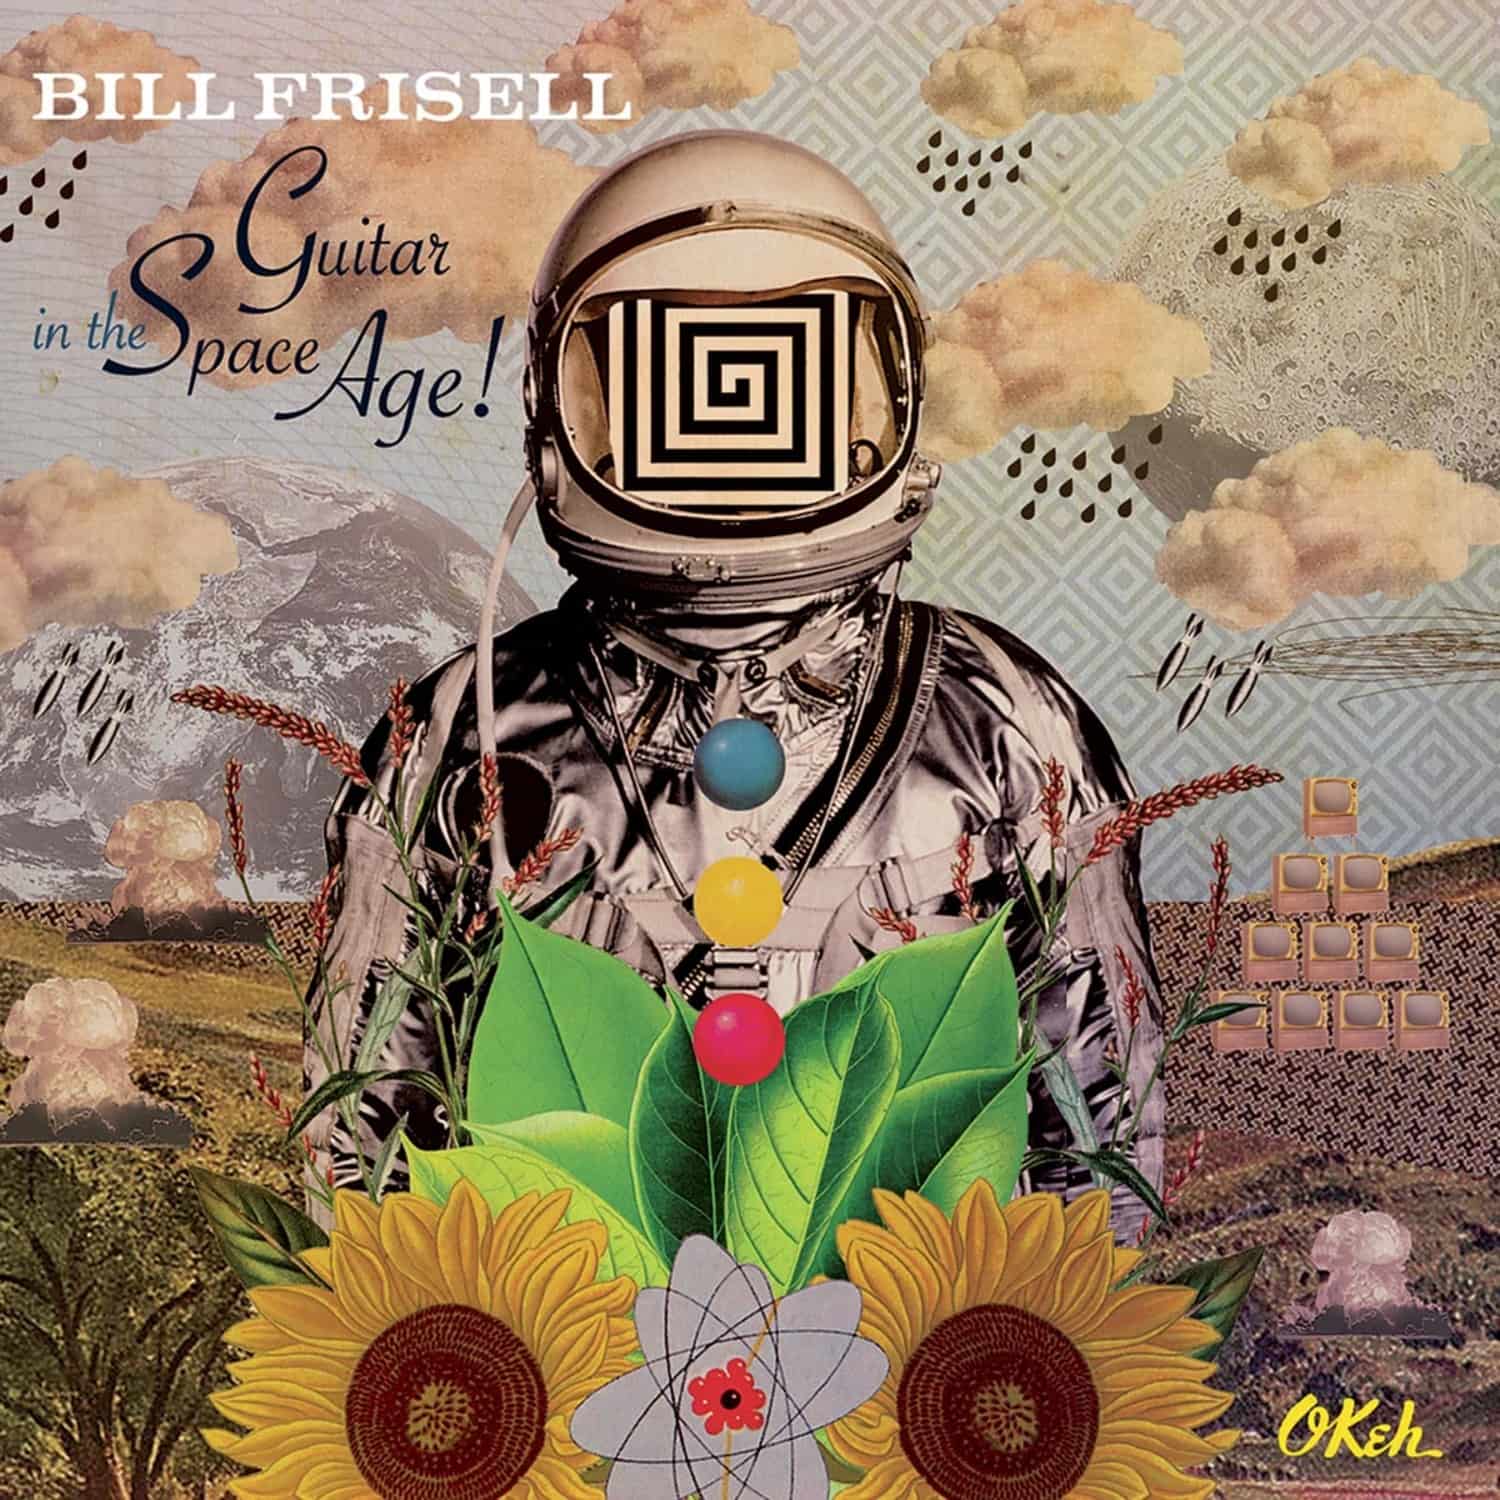 Bill Frisell - GUITAR IN THE SPACE AGE! 